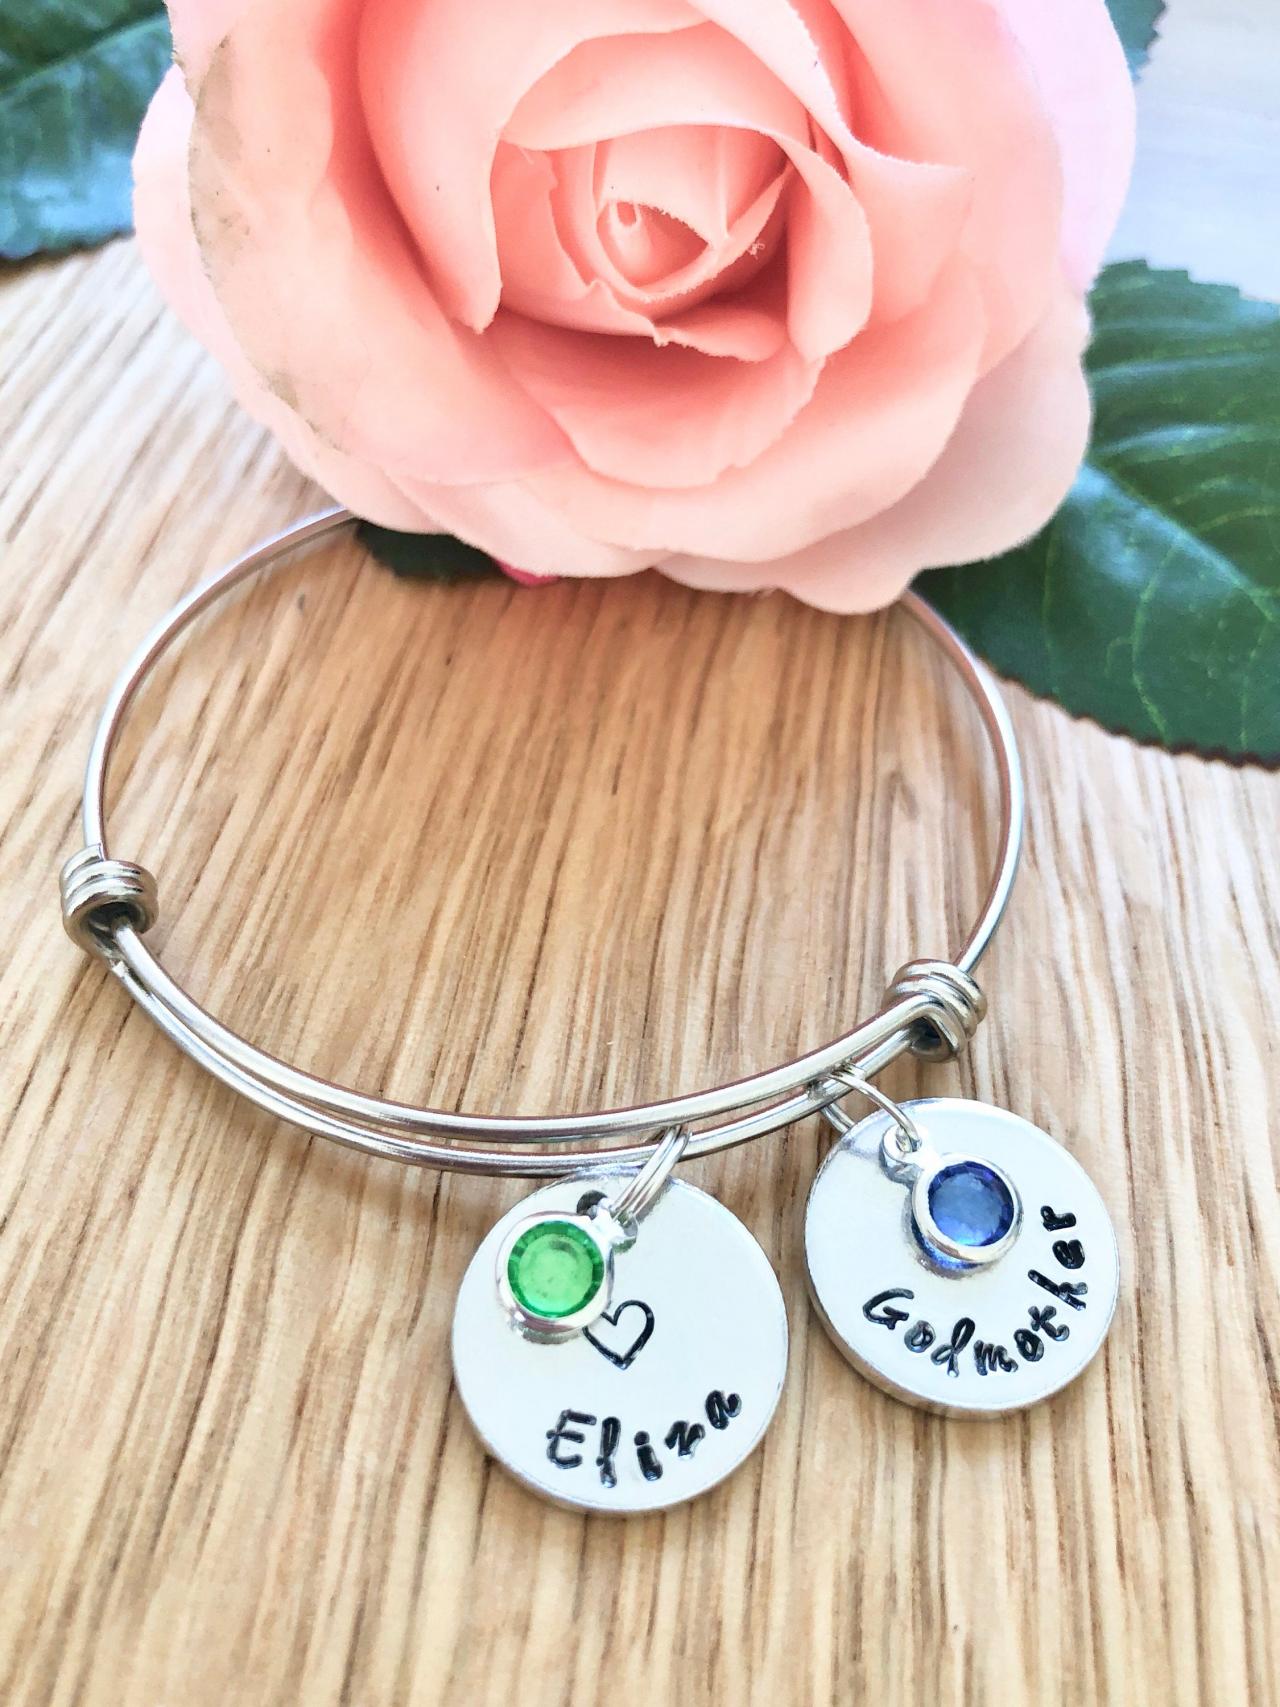 Personalised Bangle, Personalised, Bangle, Bracelet, Custom, Names, Birthstone, Personalised Bracelet, Childrens Names, Mothers Day, For her.